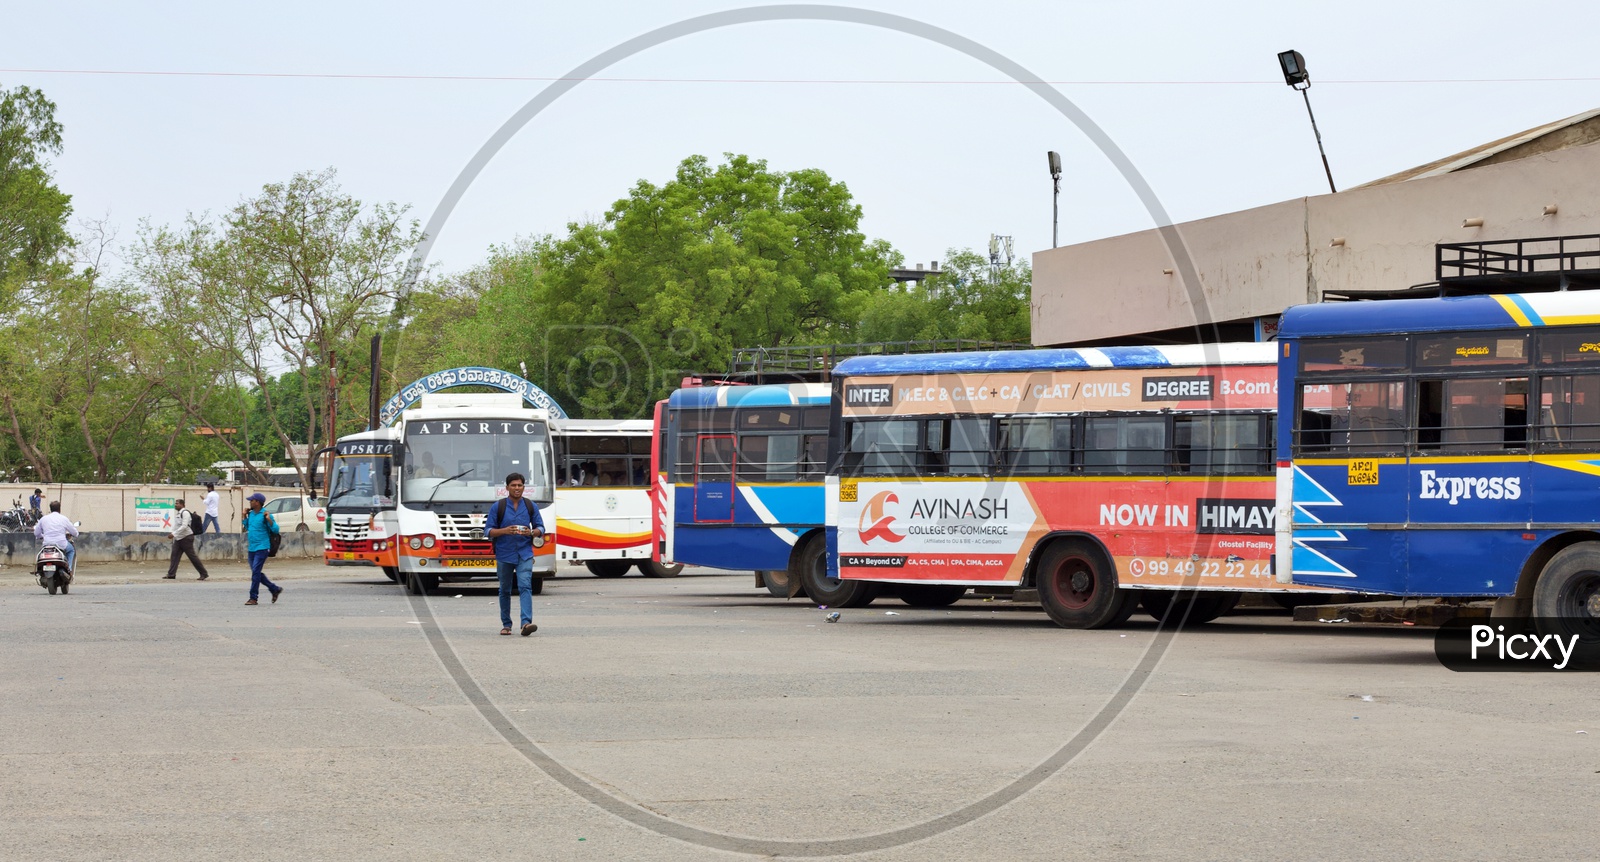 Bus stopped in kurnool bus stand.